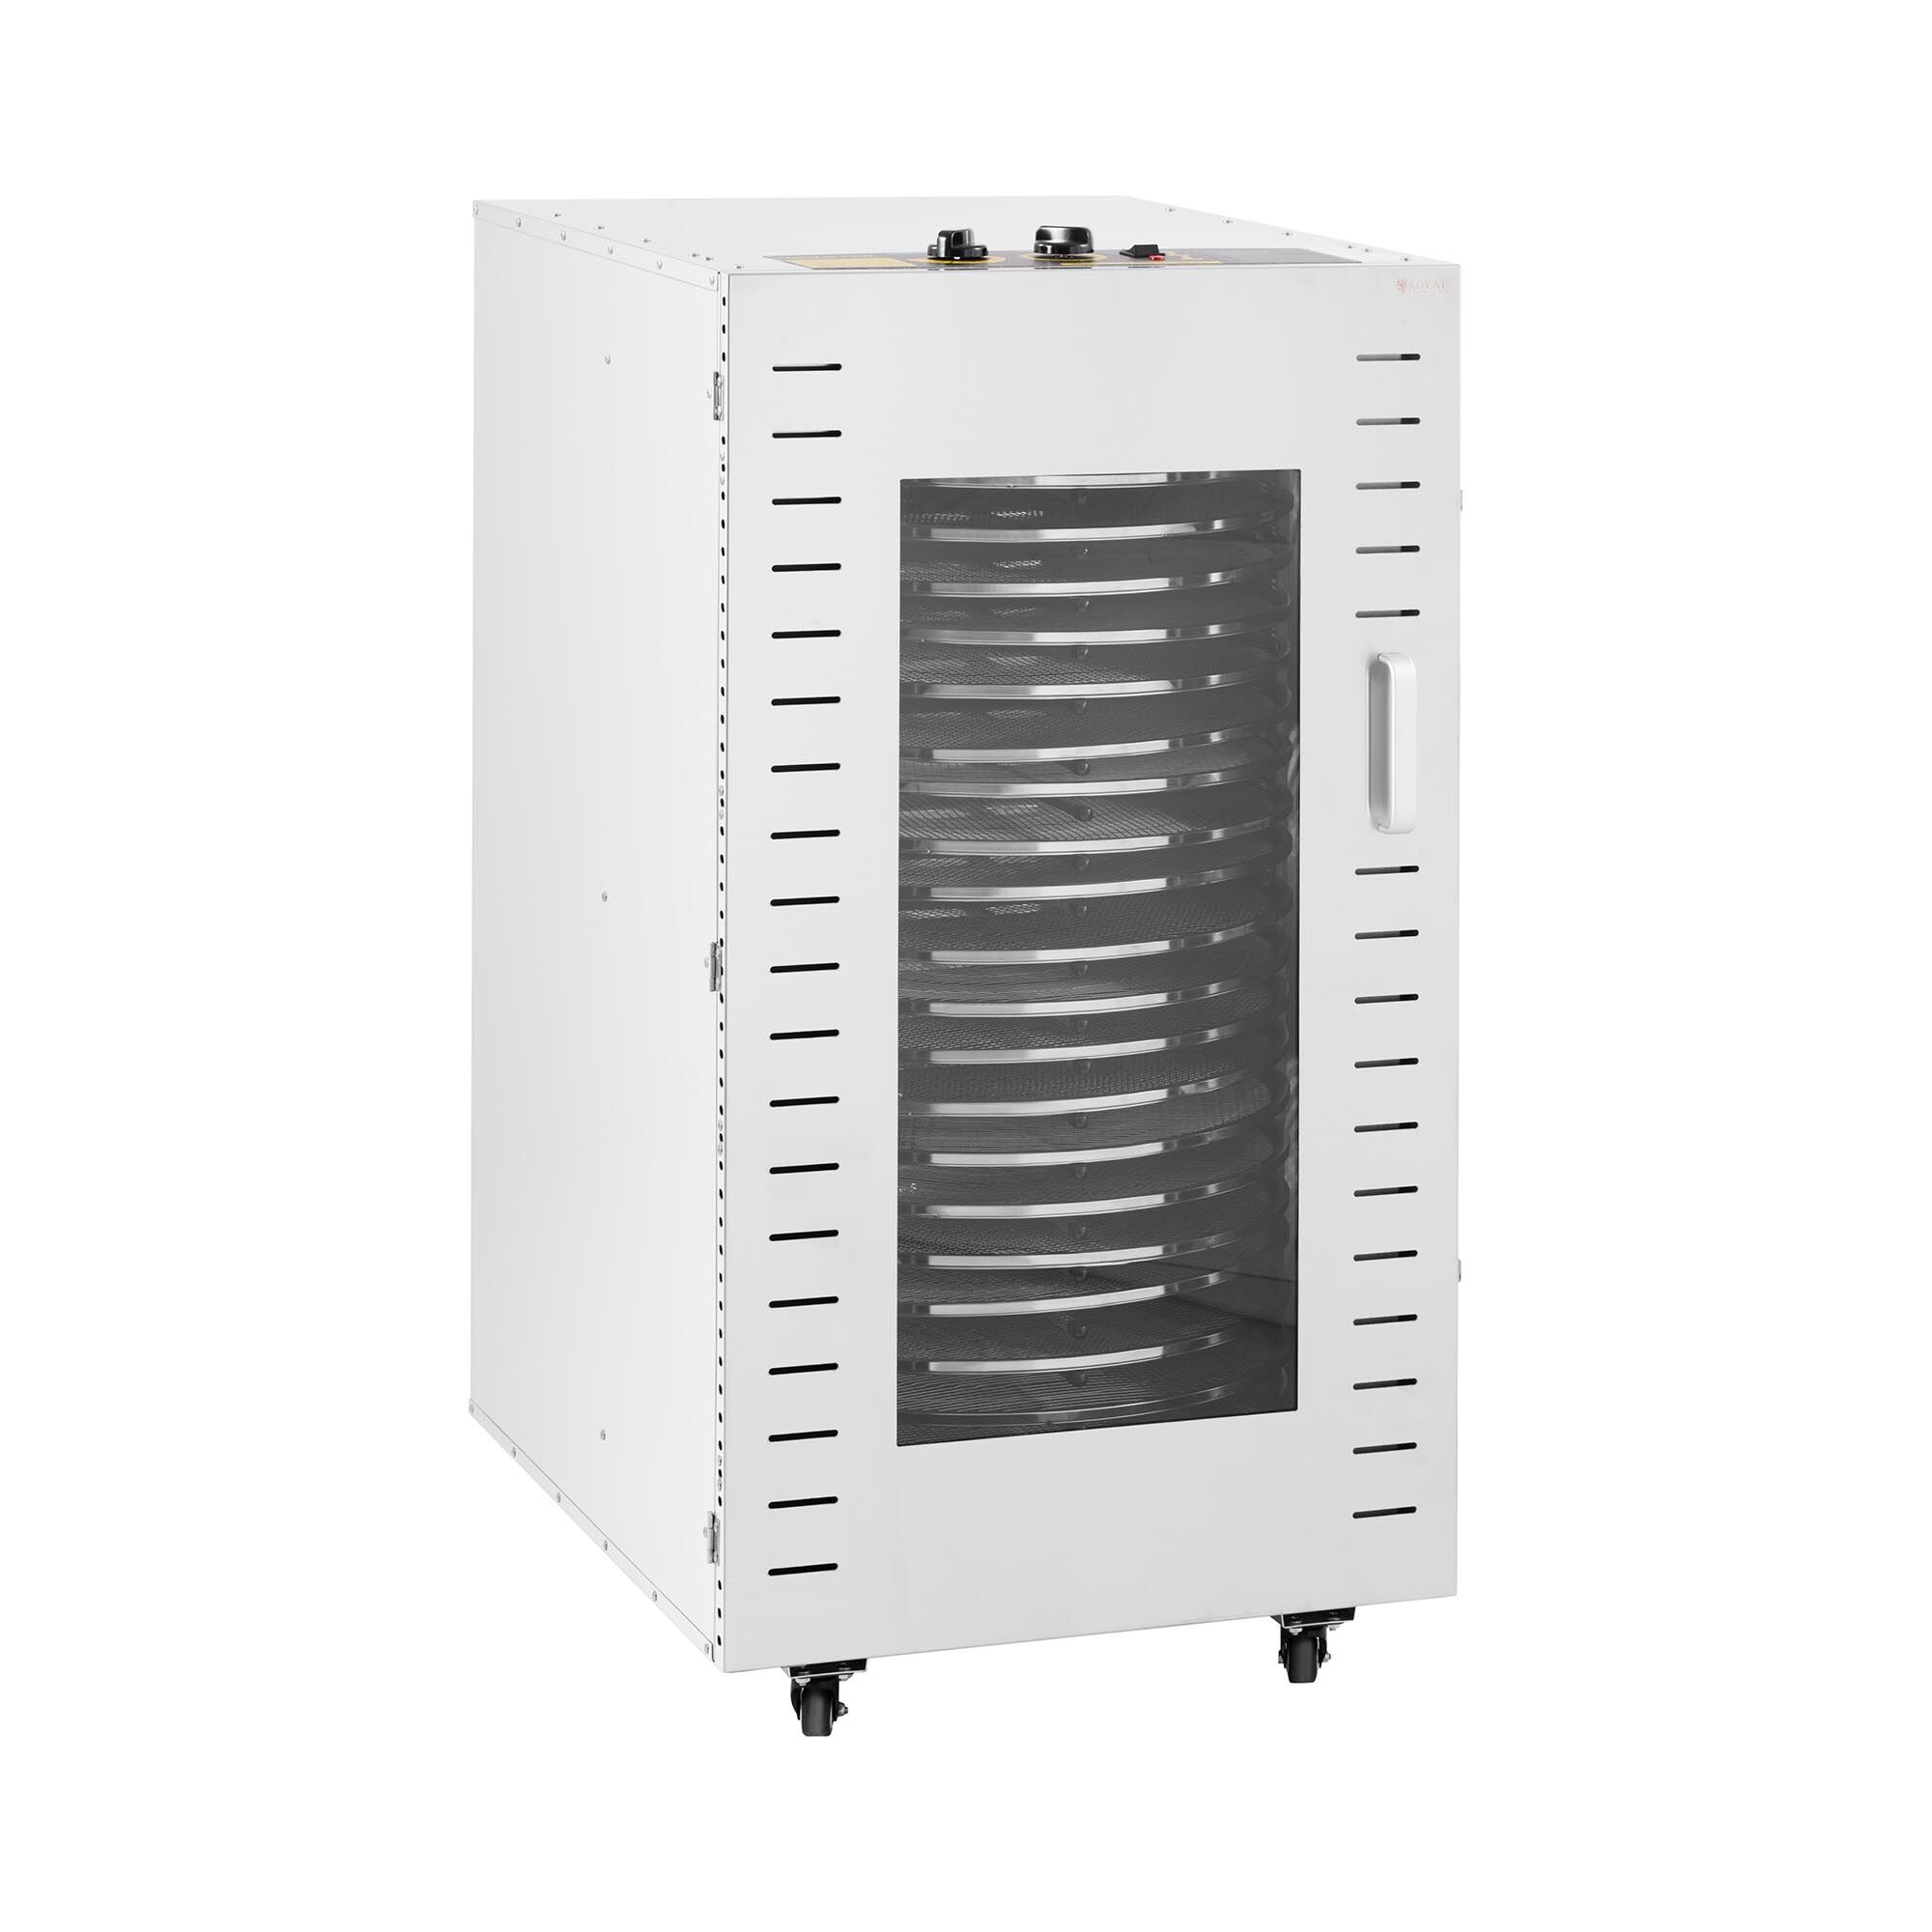 Royal Catering Food Dehydrator - 3,070 W - Royal Catering - 22 trays